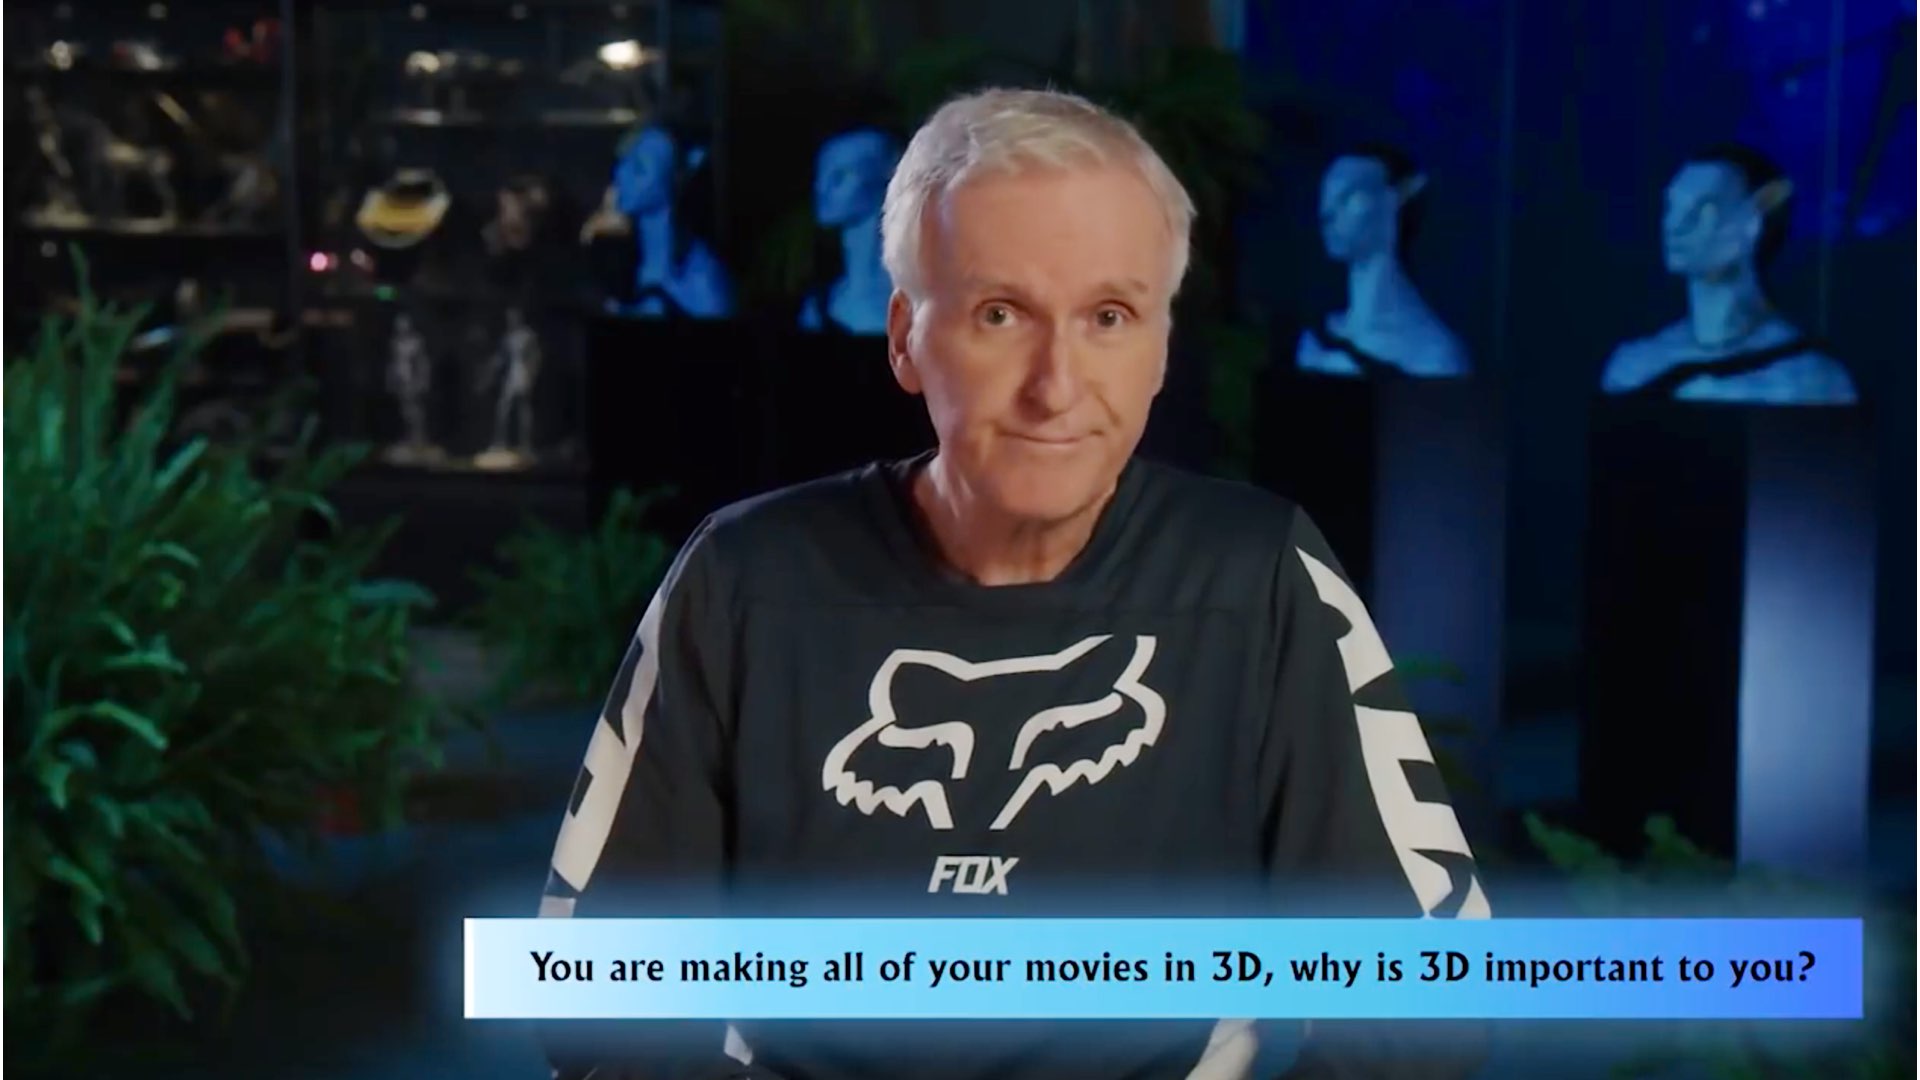 Avatar’s James Cameron Explains the Necessity of Shooting in 3D